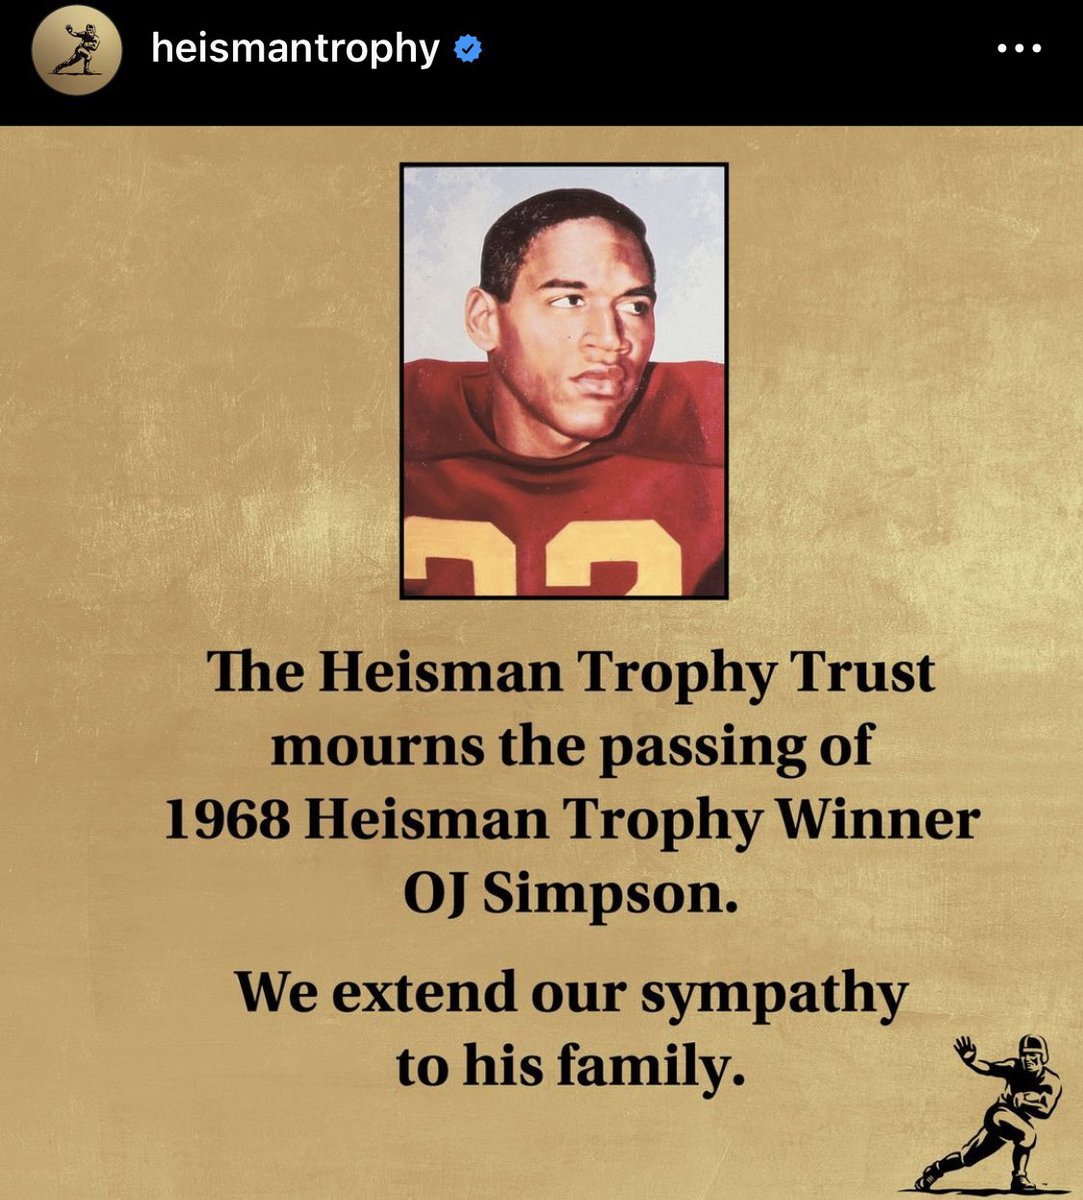 The official Heisman Trophy account “mourns” the death of OJ Simpson, but Reggie Bush still can’t get his Heisman back?!